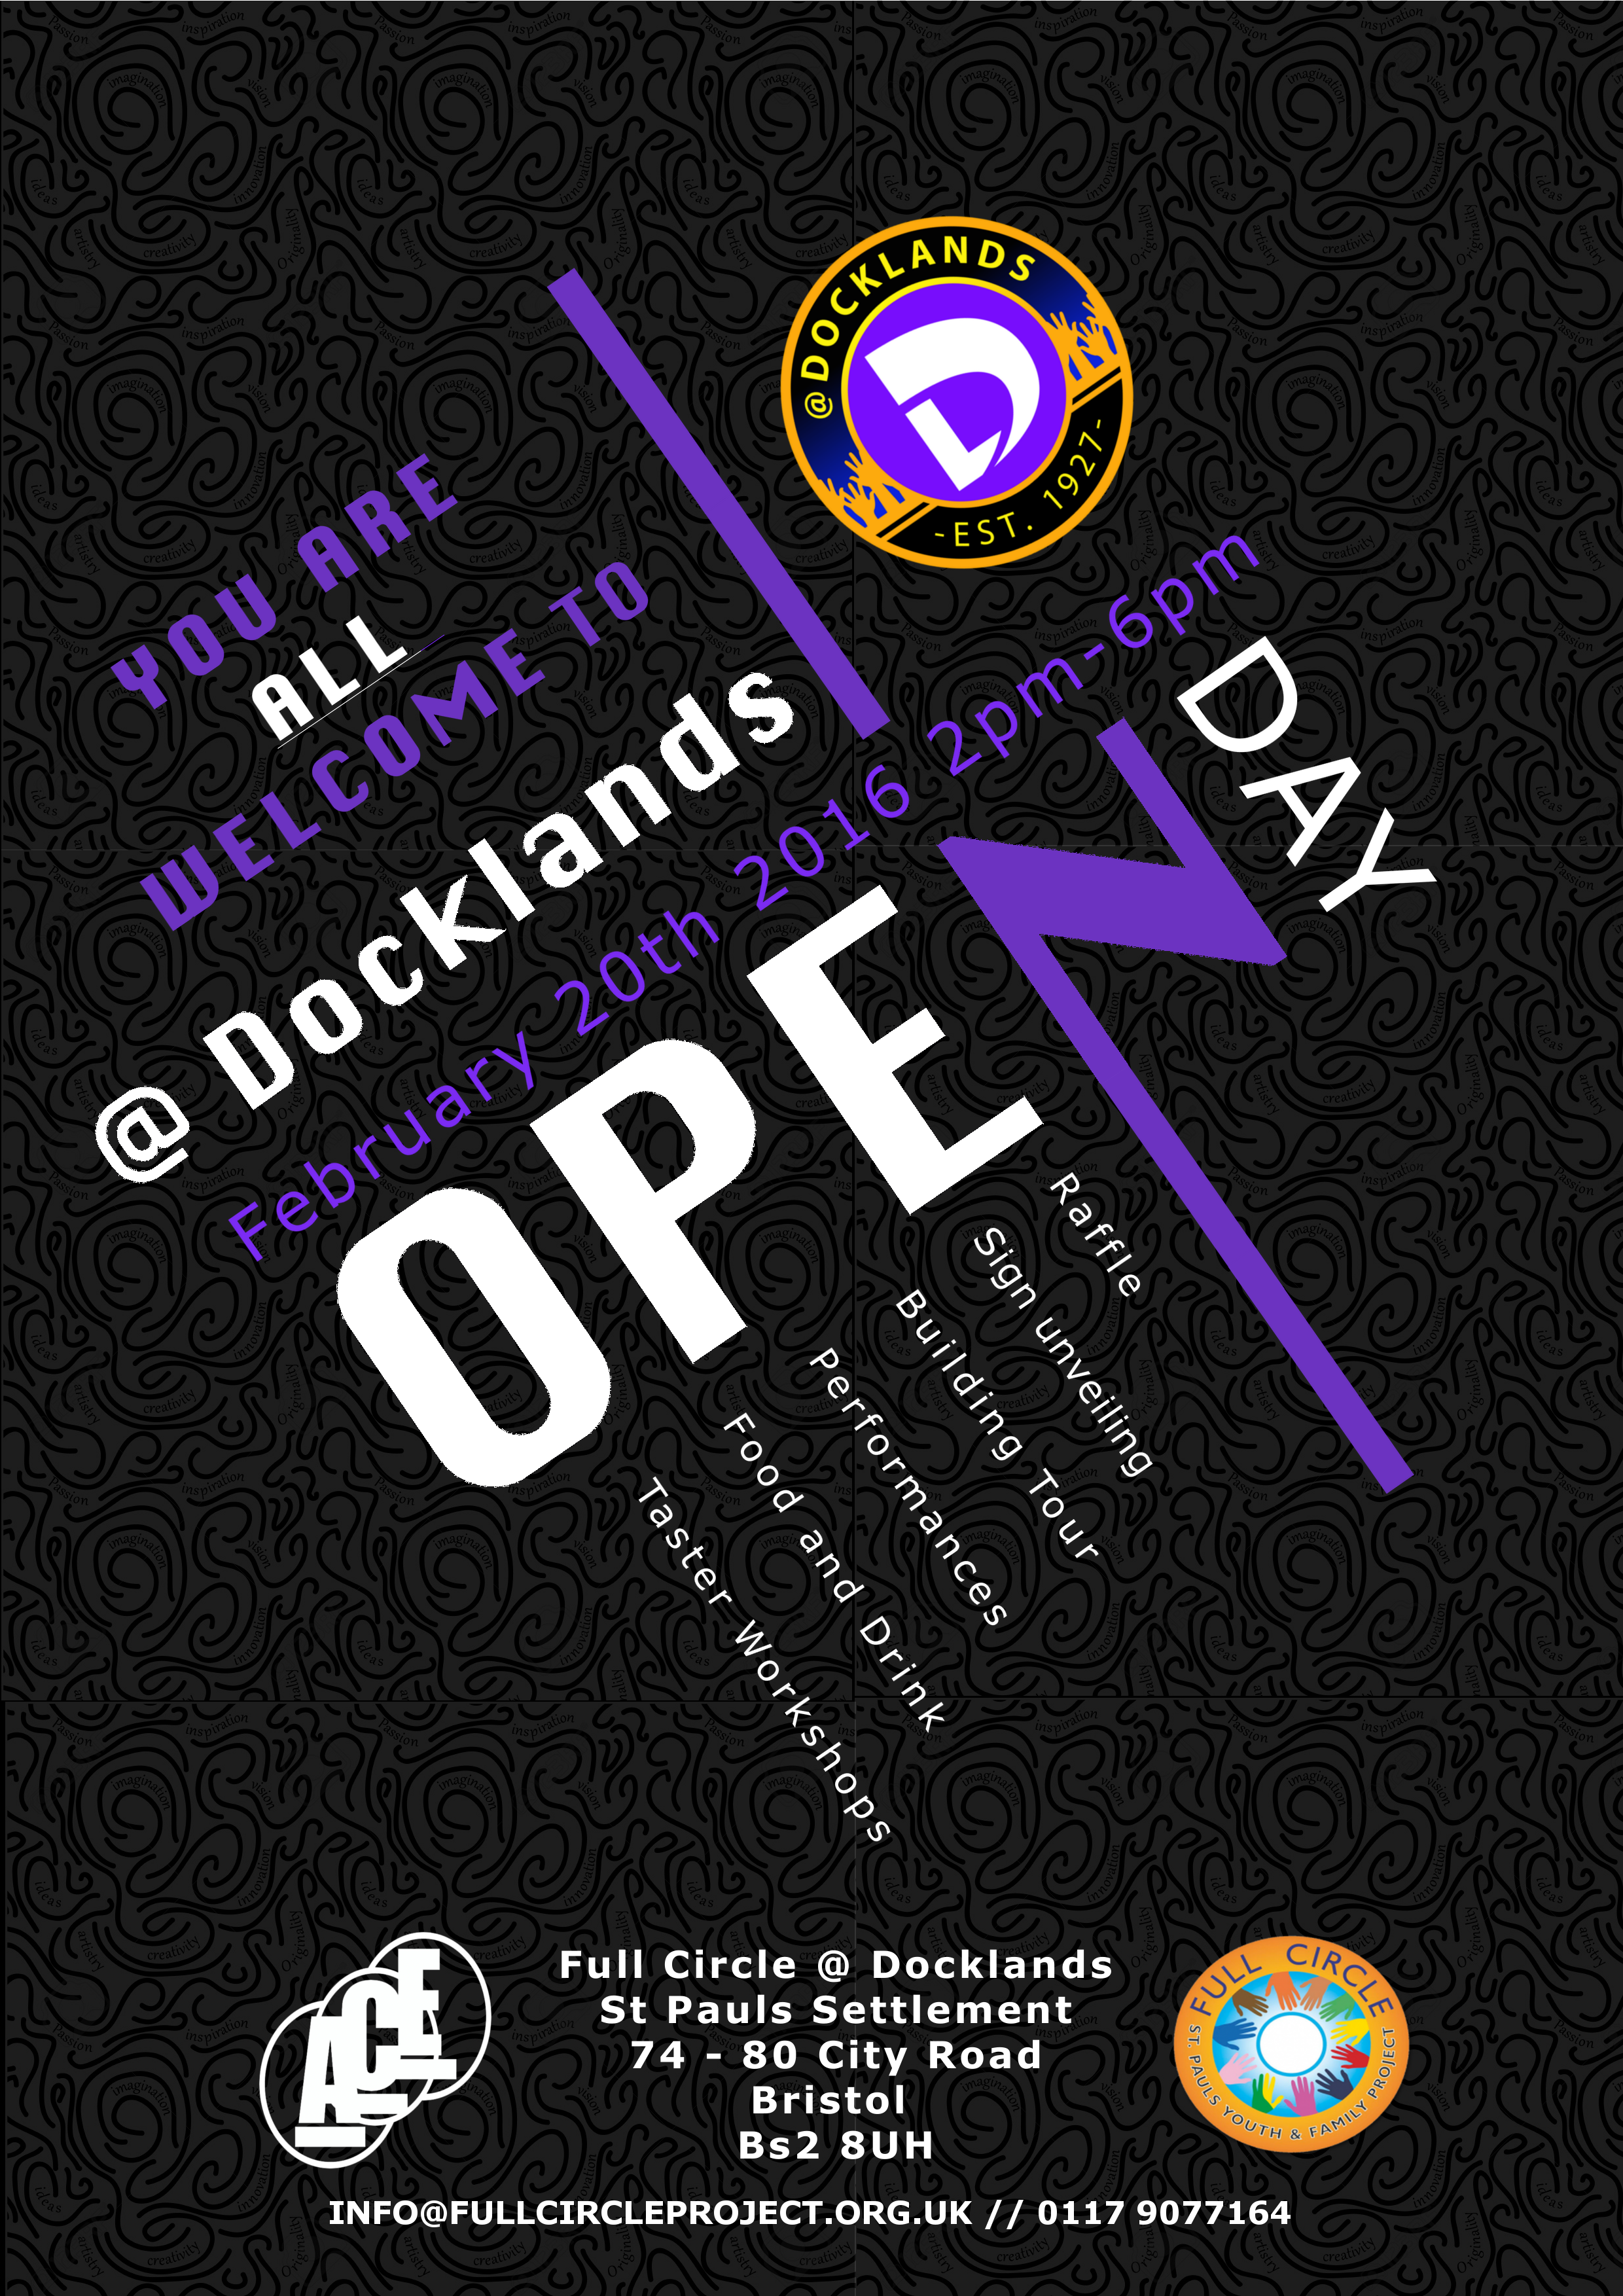 Docklands Open Day